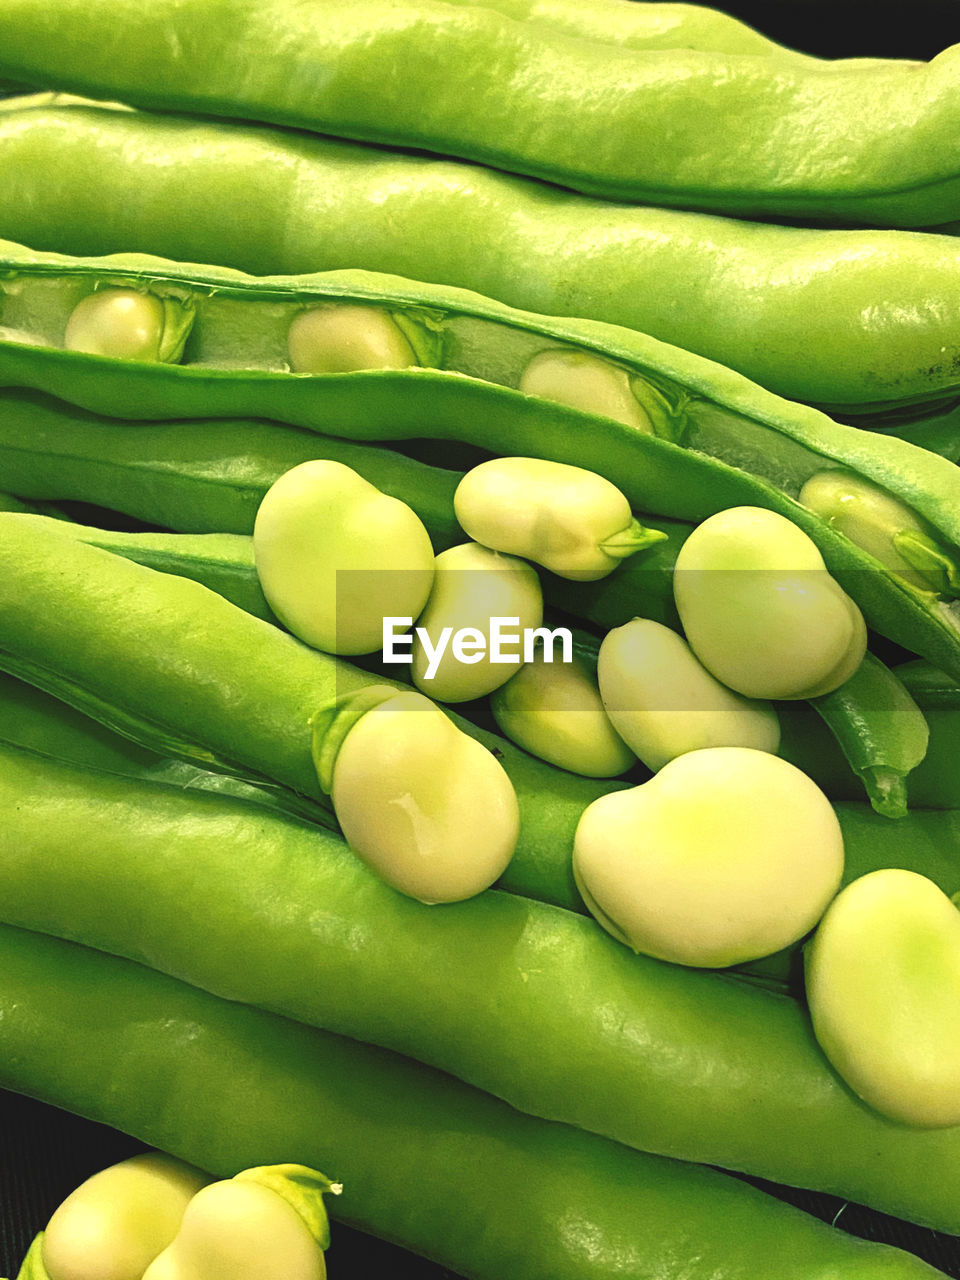 HIGH ANGLE VIEW OF EGGS IN GREEN BEANS